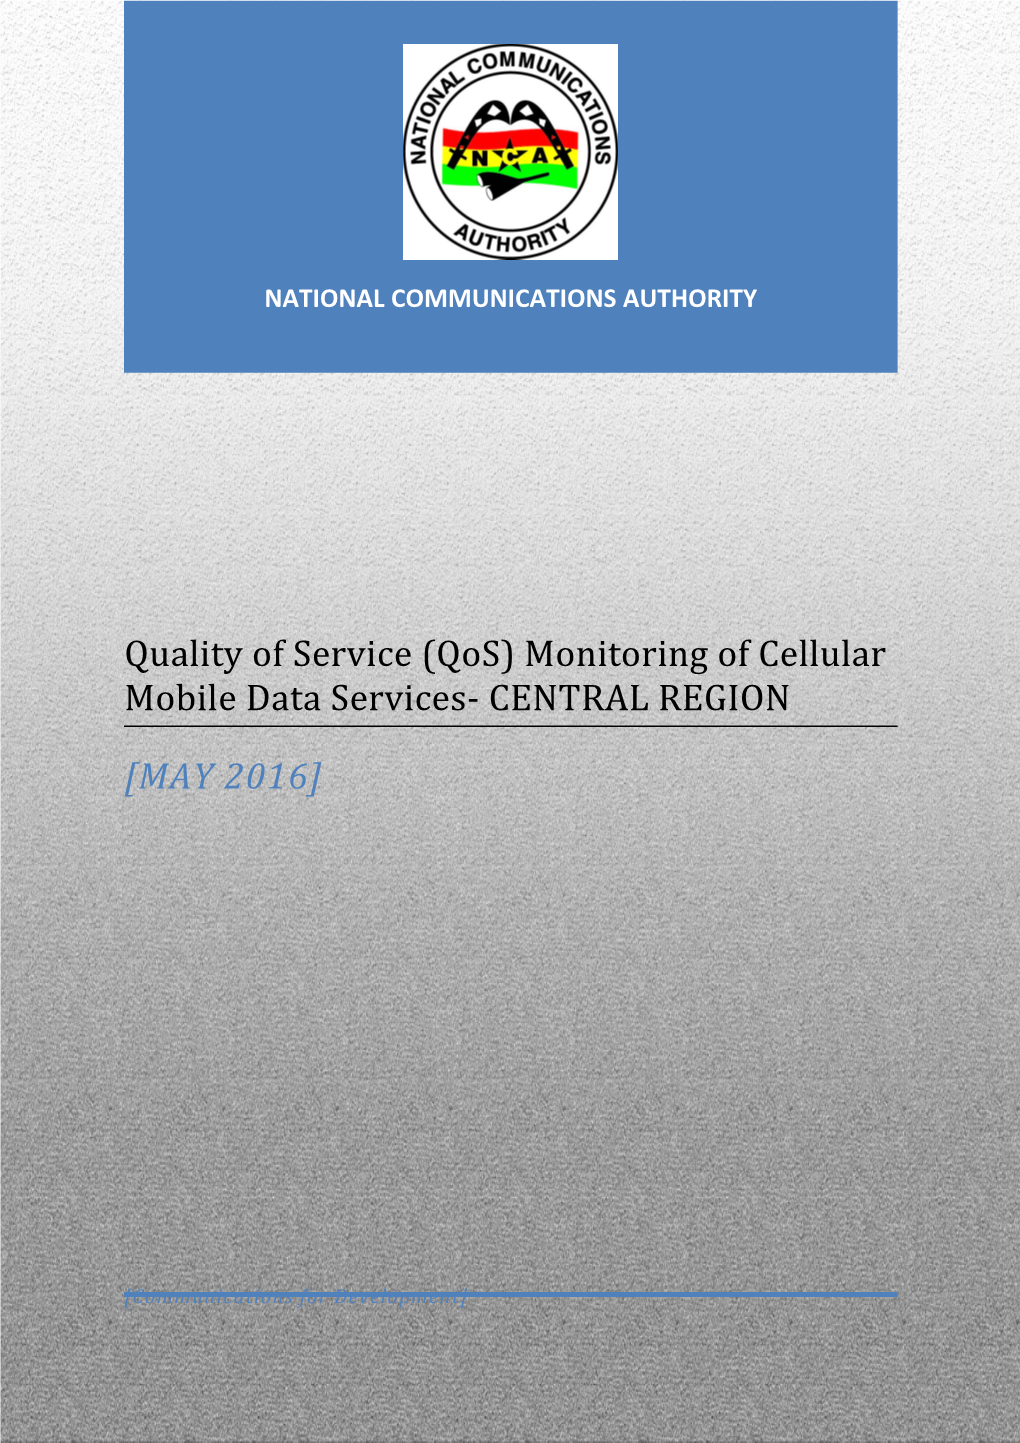 QUALITY of SERVICE (Qos) MONITORING of CELLULAR MOBILE DATA SERVICES in CENTRAL REGION